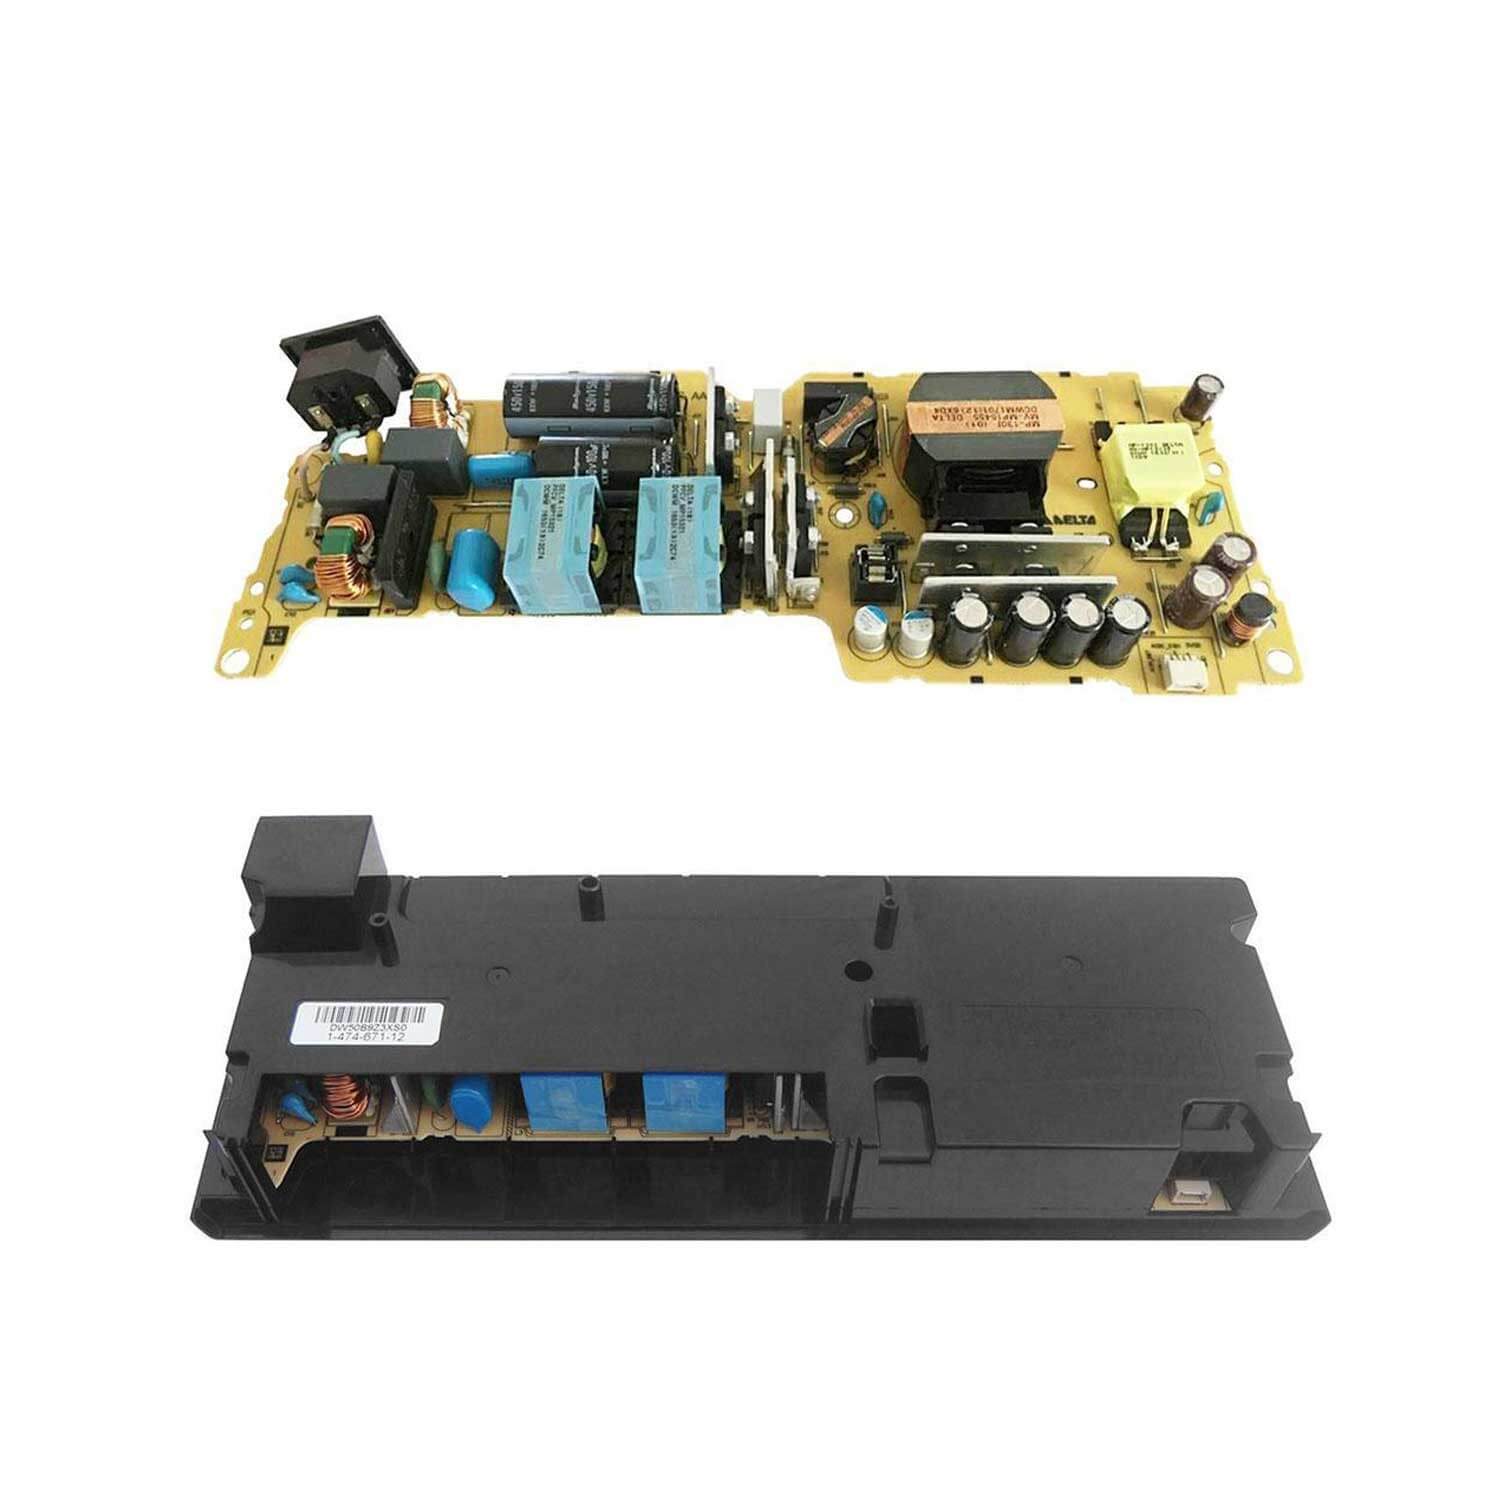 https://www.foxchip-electronic.com/123403/alimentation-ps4-pro-adp-300crpieces-detachees-playstation-4.jpg